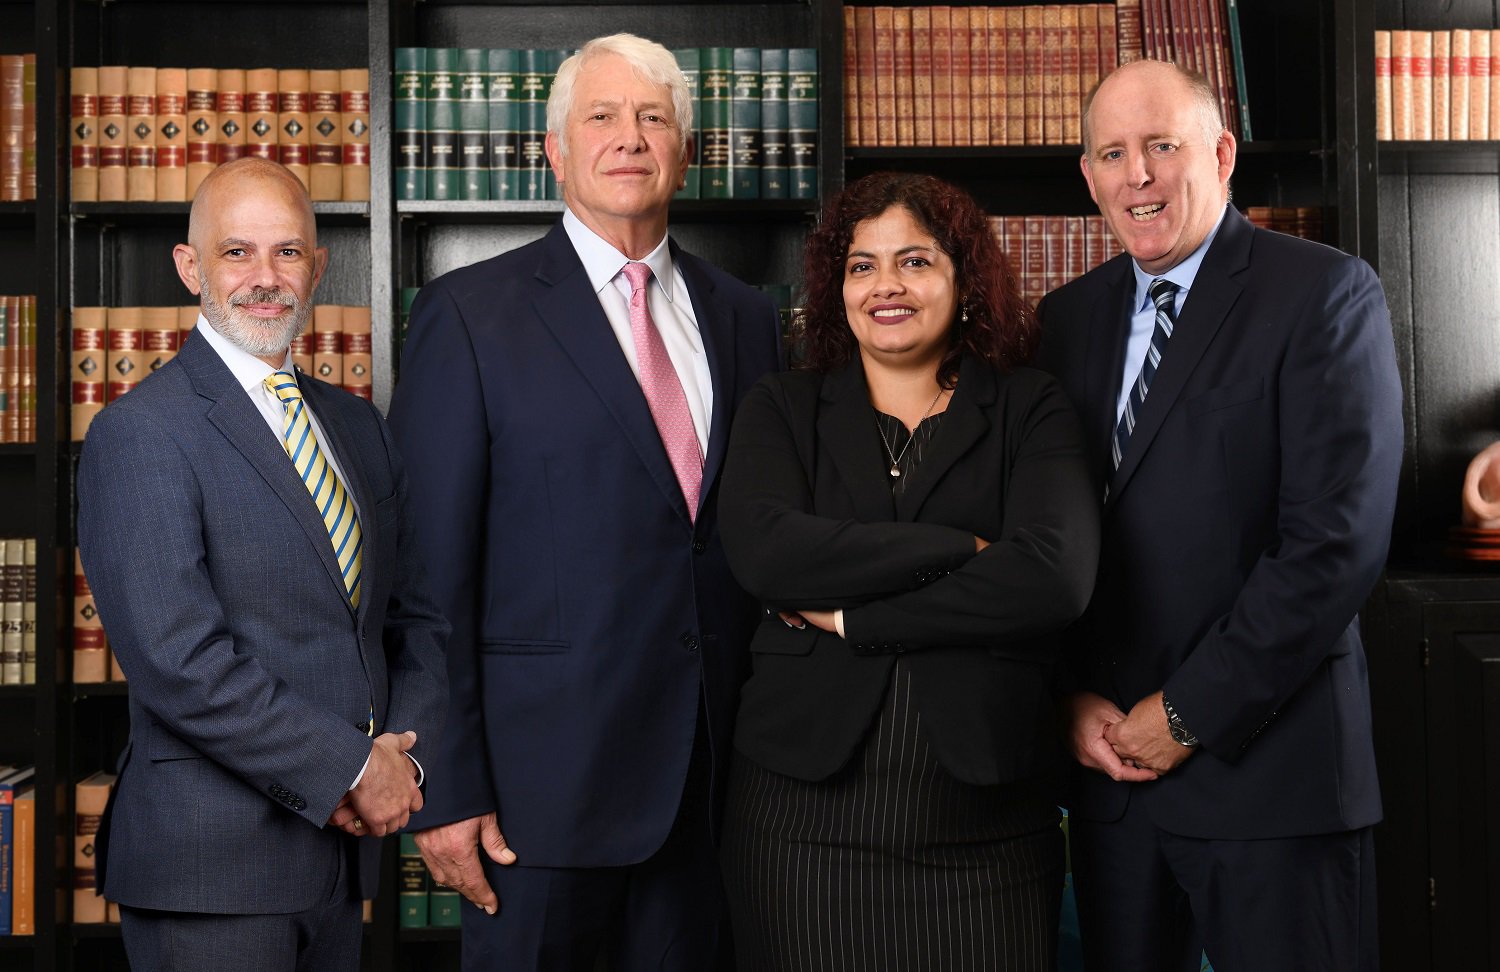 Group photo capturing three men and one woman, prominently featuring the professionals from R&G Personal Injury Lawyers. The image emphasizes the firm's brand with the text 'R&G PERSONAL INJURY LAWYERS,' aligning seamlessly with the context of the page.